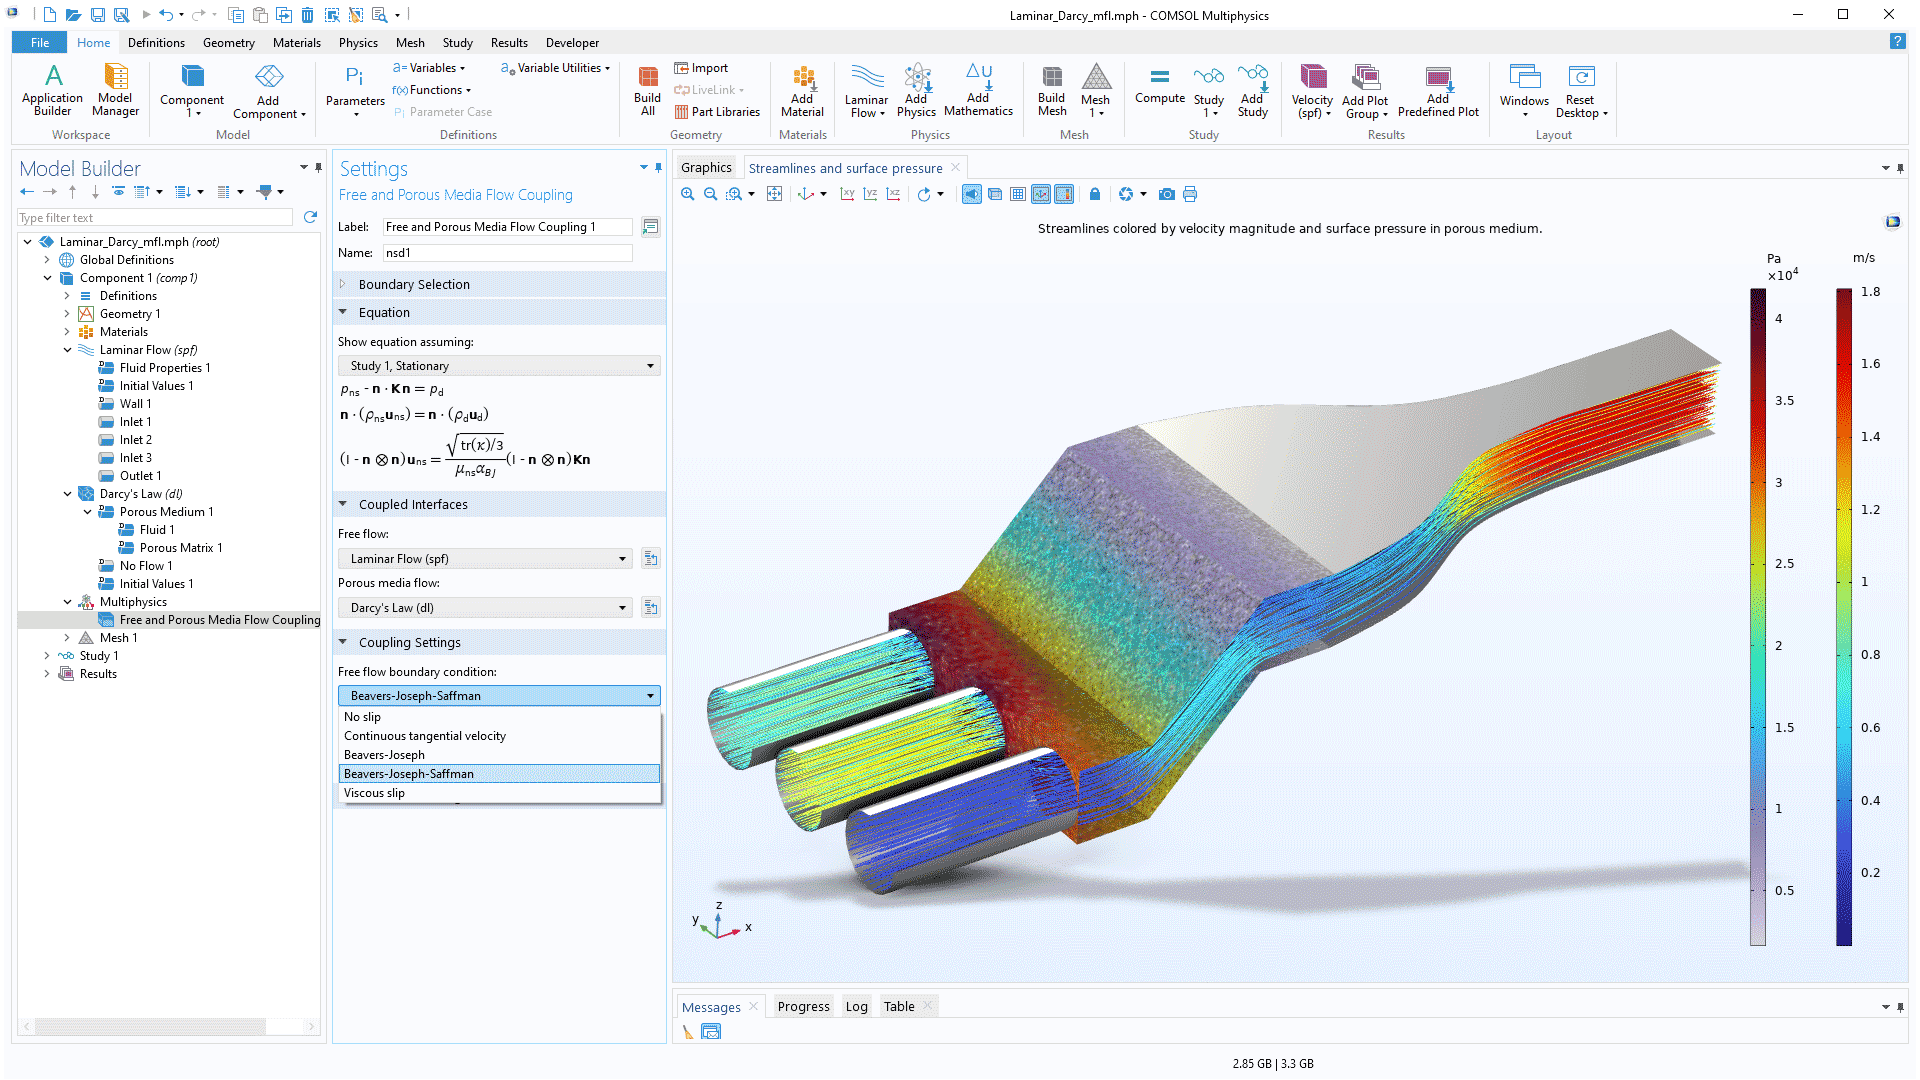 The COMSOL Multiphysics UI showing the Model Builder with the Free and Porous Media Flow Coupling node highlighted, the corresponding Settings window, and a nozzle model in the Graphics window.